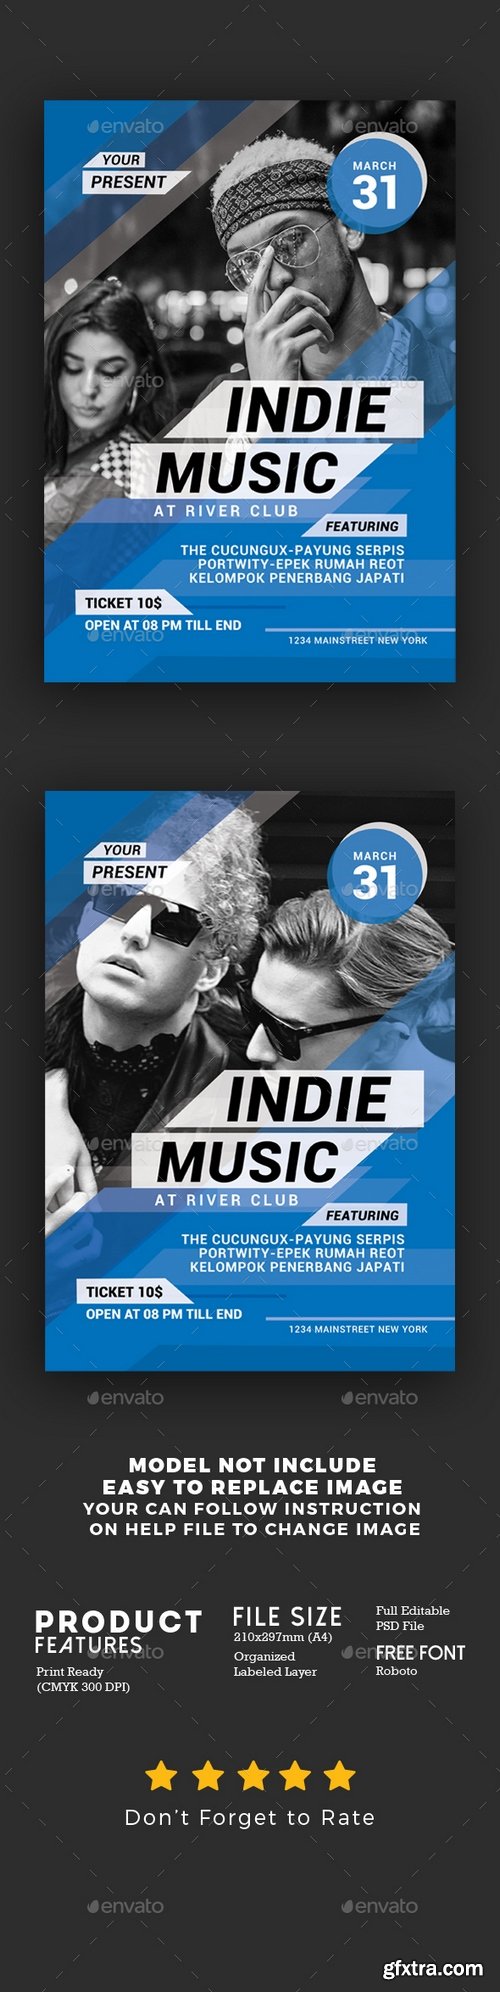 Graphicriver - Indie Music Event Flyer 21635600